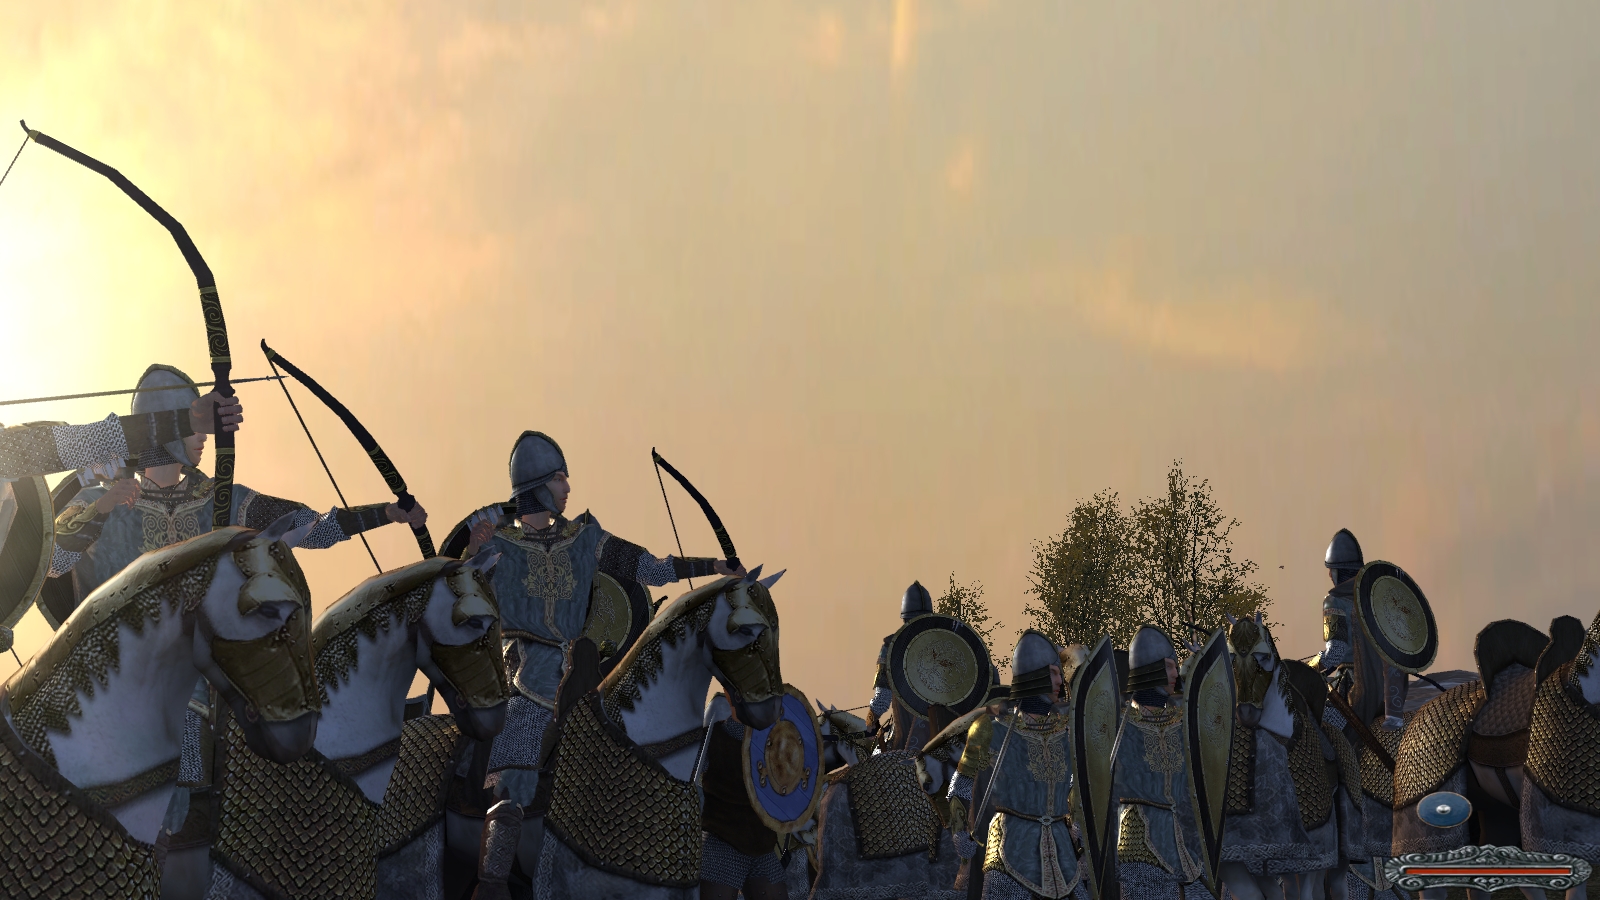 Last days warband. Mount and Blade Warband the last Days of the third age. Mount & Blade: Warband - the last Days (of the third age of Middle Earth). Mount and Blade Средиземье. The last Days of the third age Саурон.